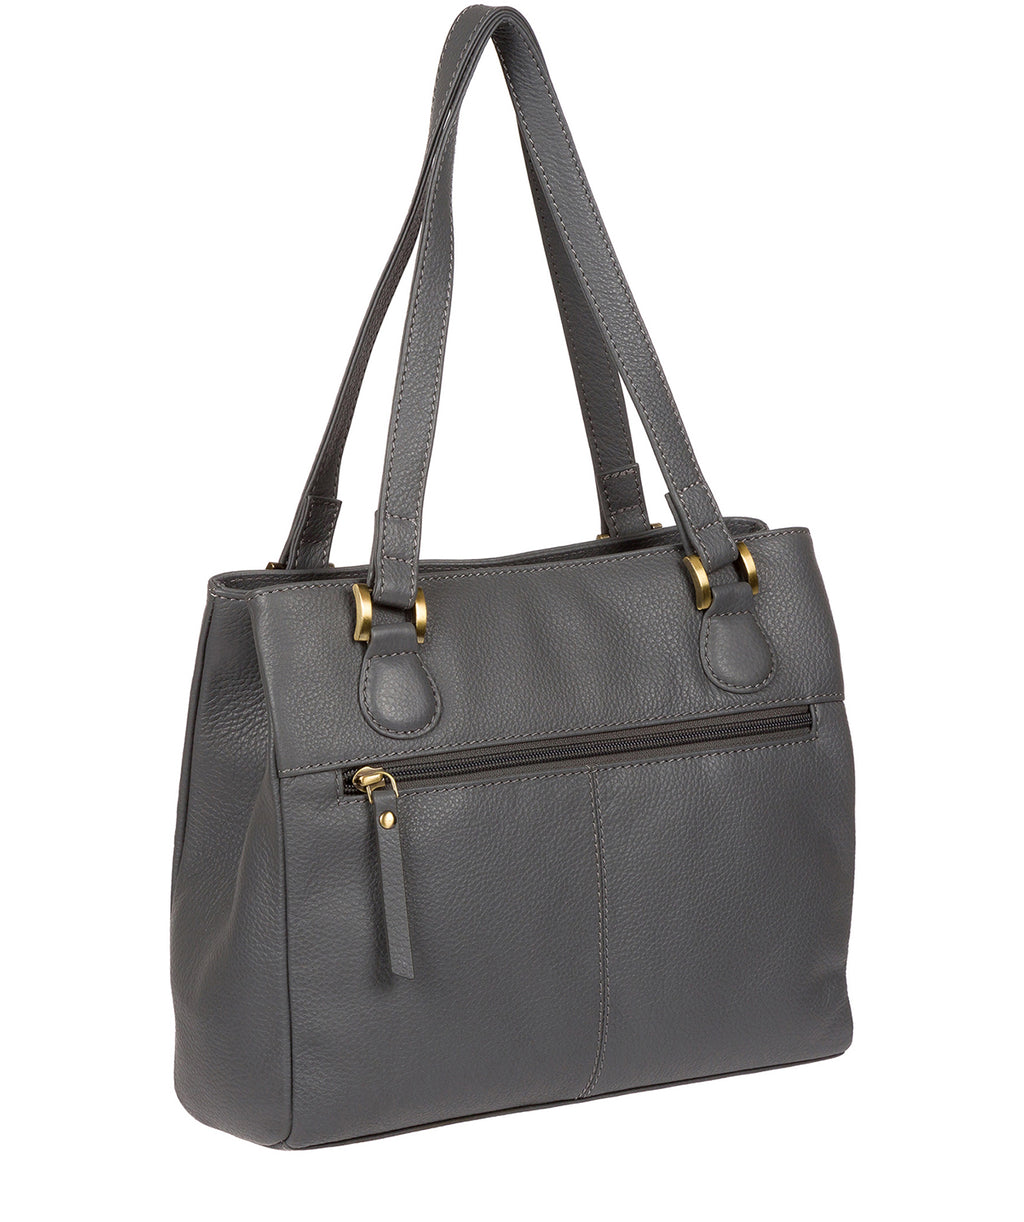 Grey Leather Handbag Milana By Pure Luxuries Pure Luxuries London 